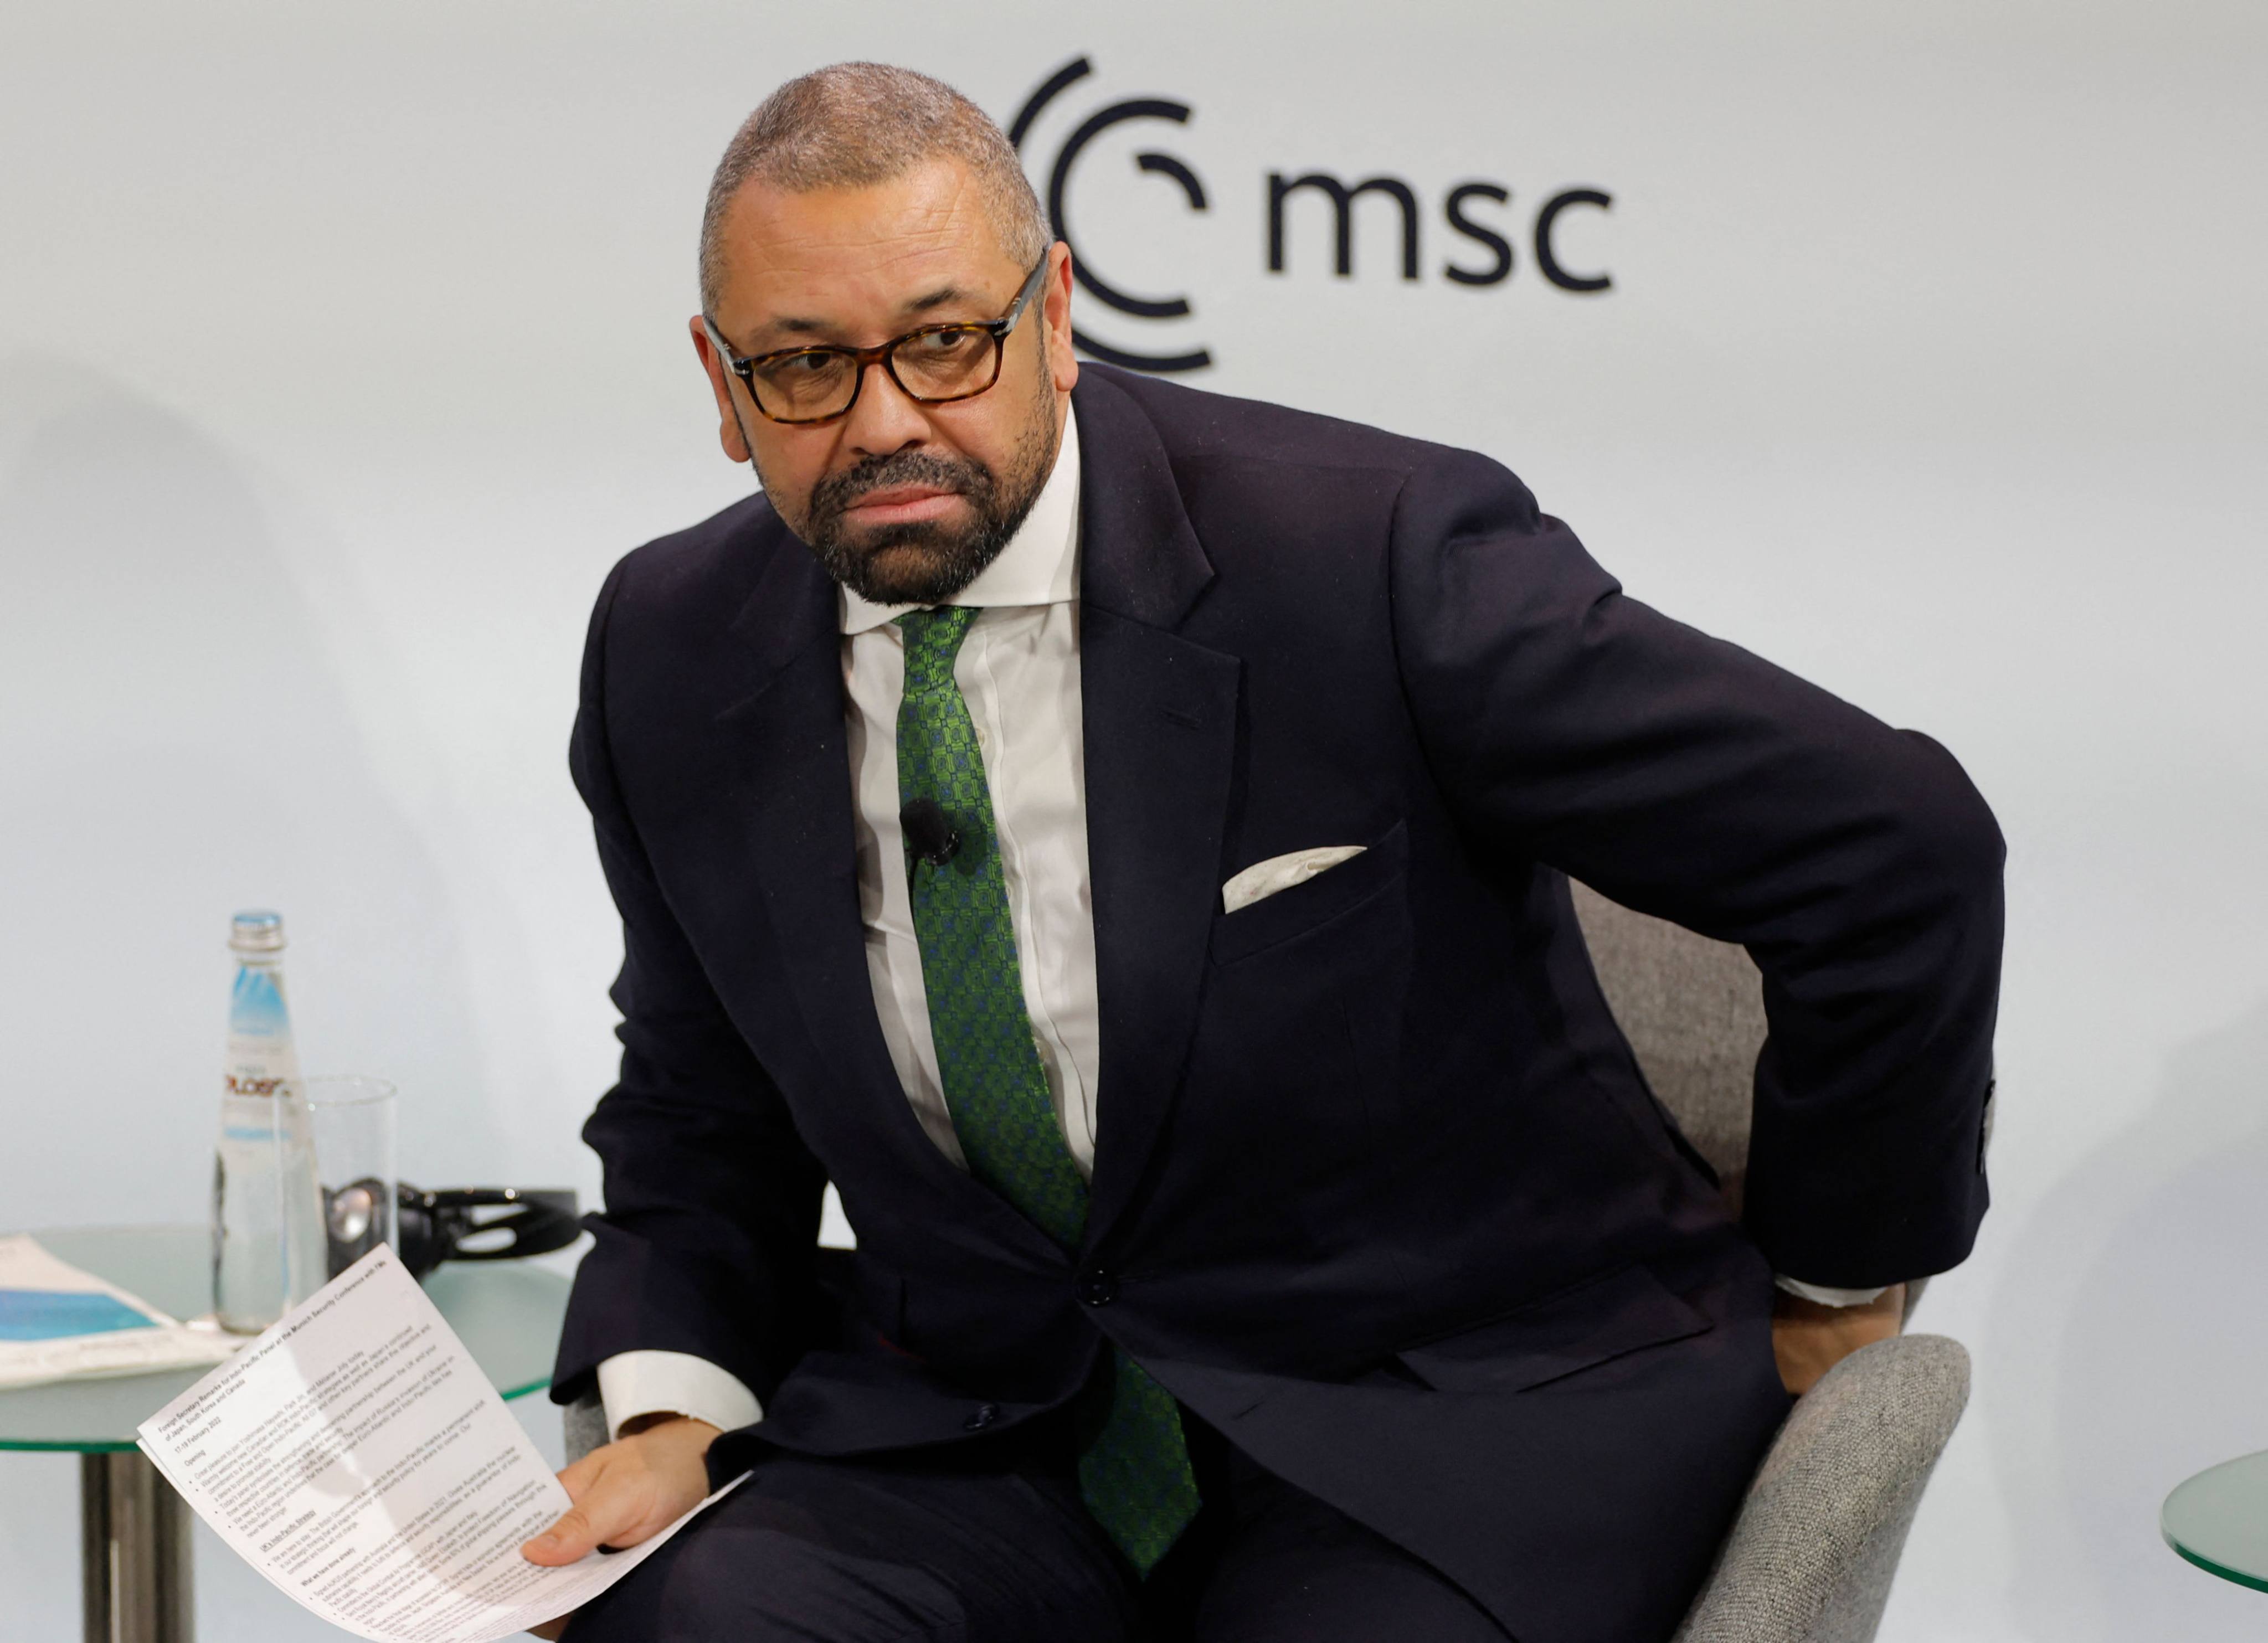 Britain’s foreign minister James Cleverly at the Munich Security Conference in Munich, Germany on Saturday. Photo: AFP